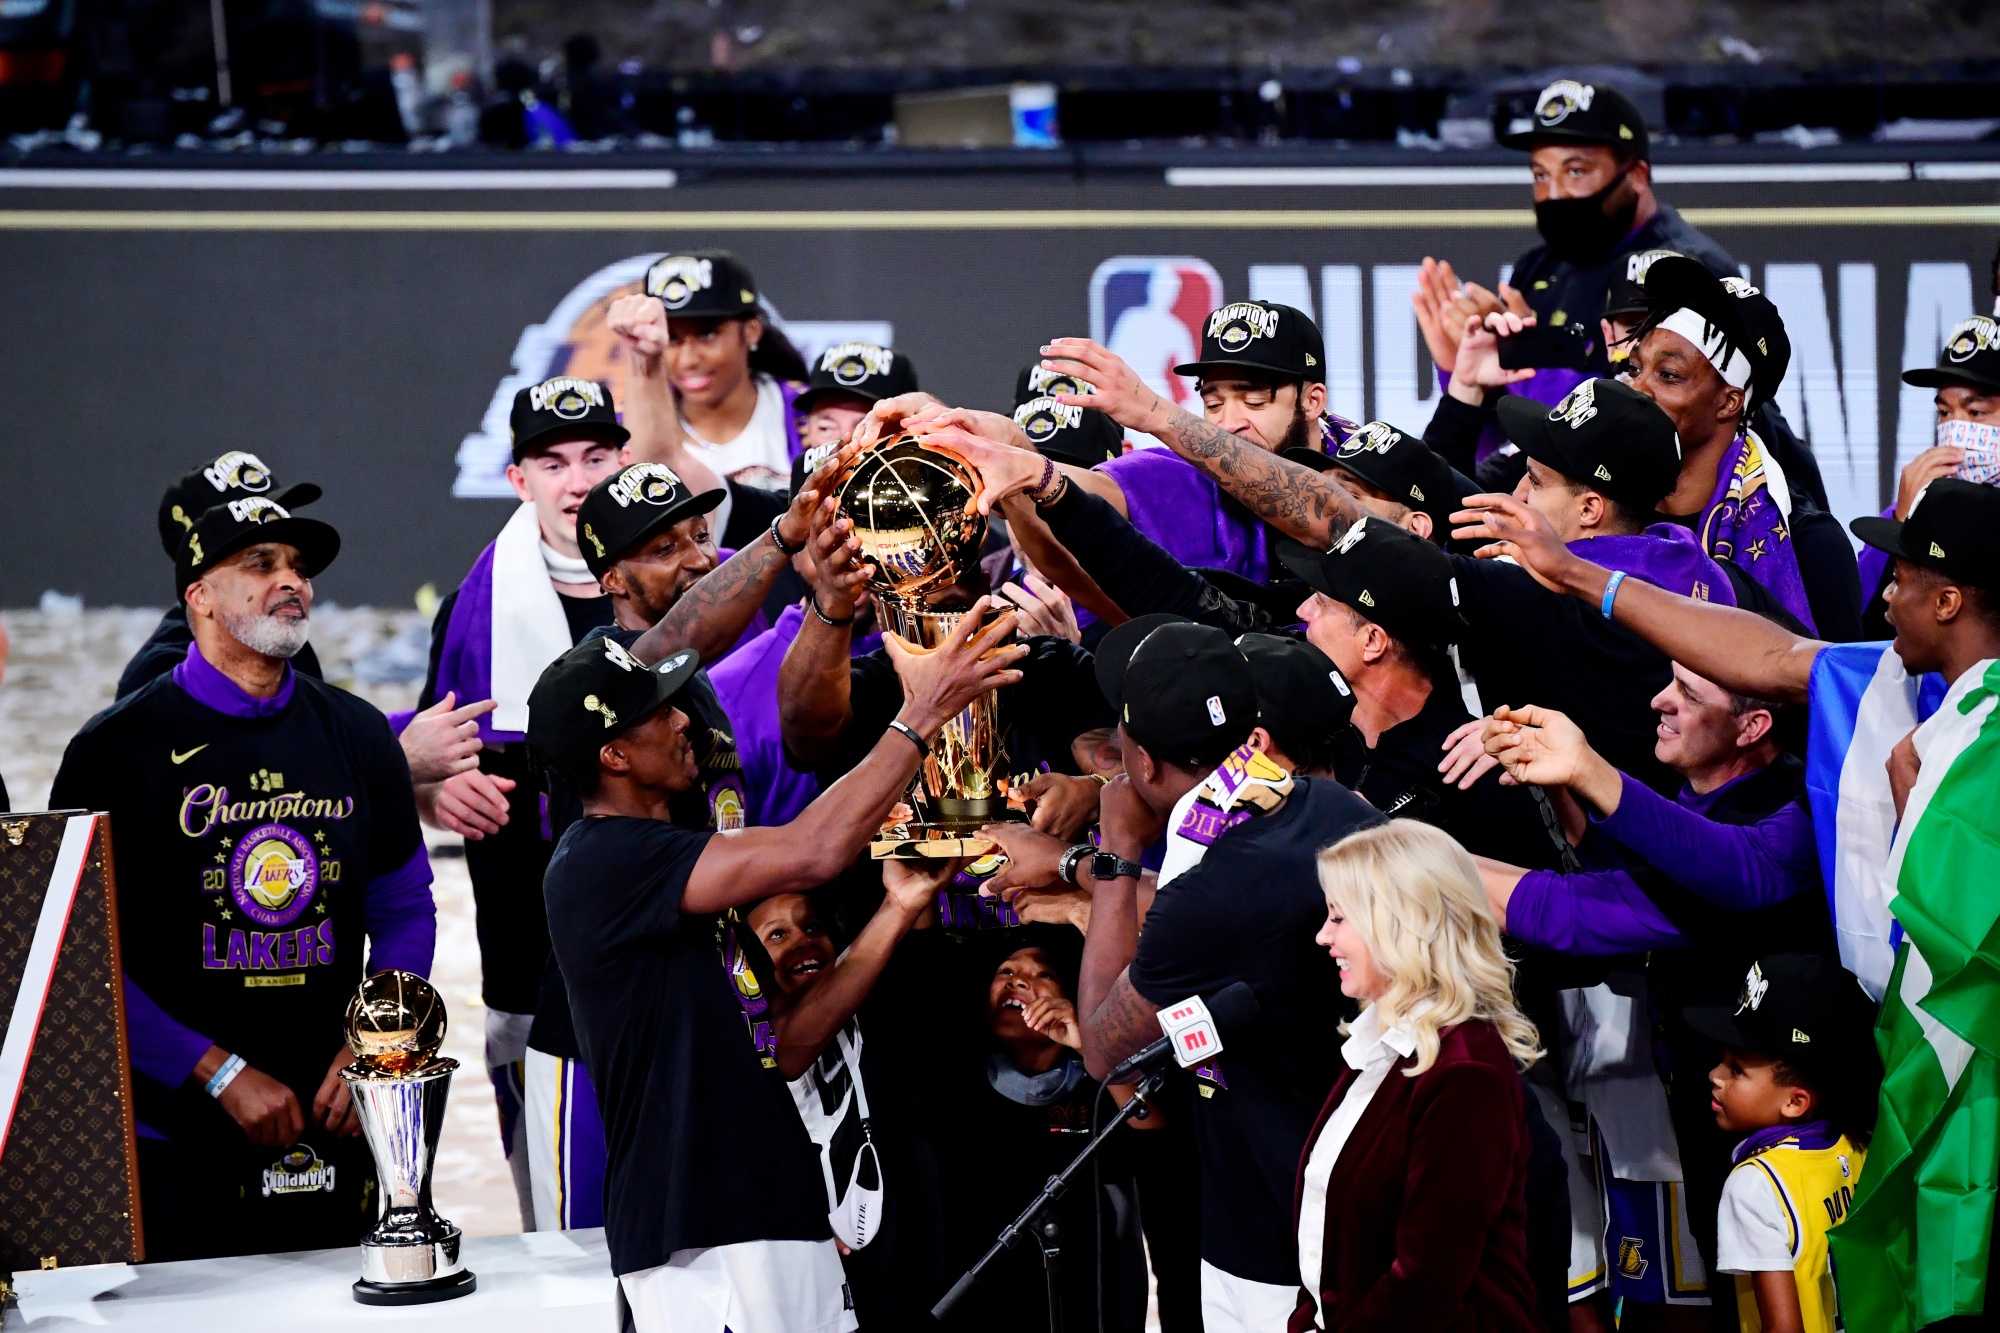 Lakers tie Celtics for NBA record 17th championship after closing